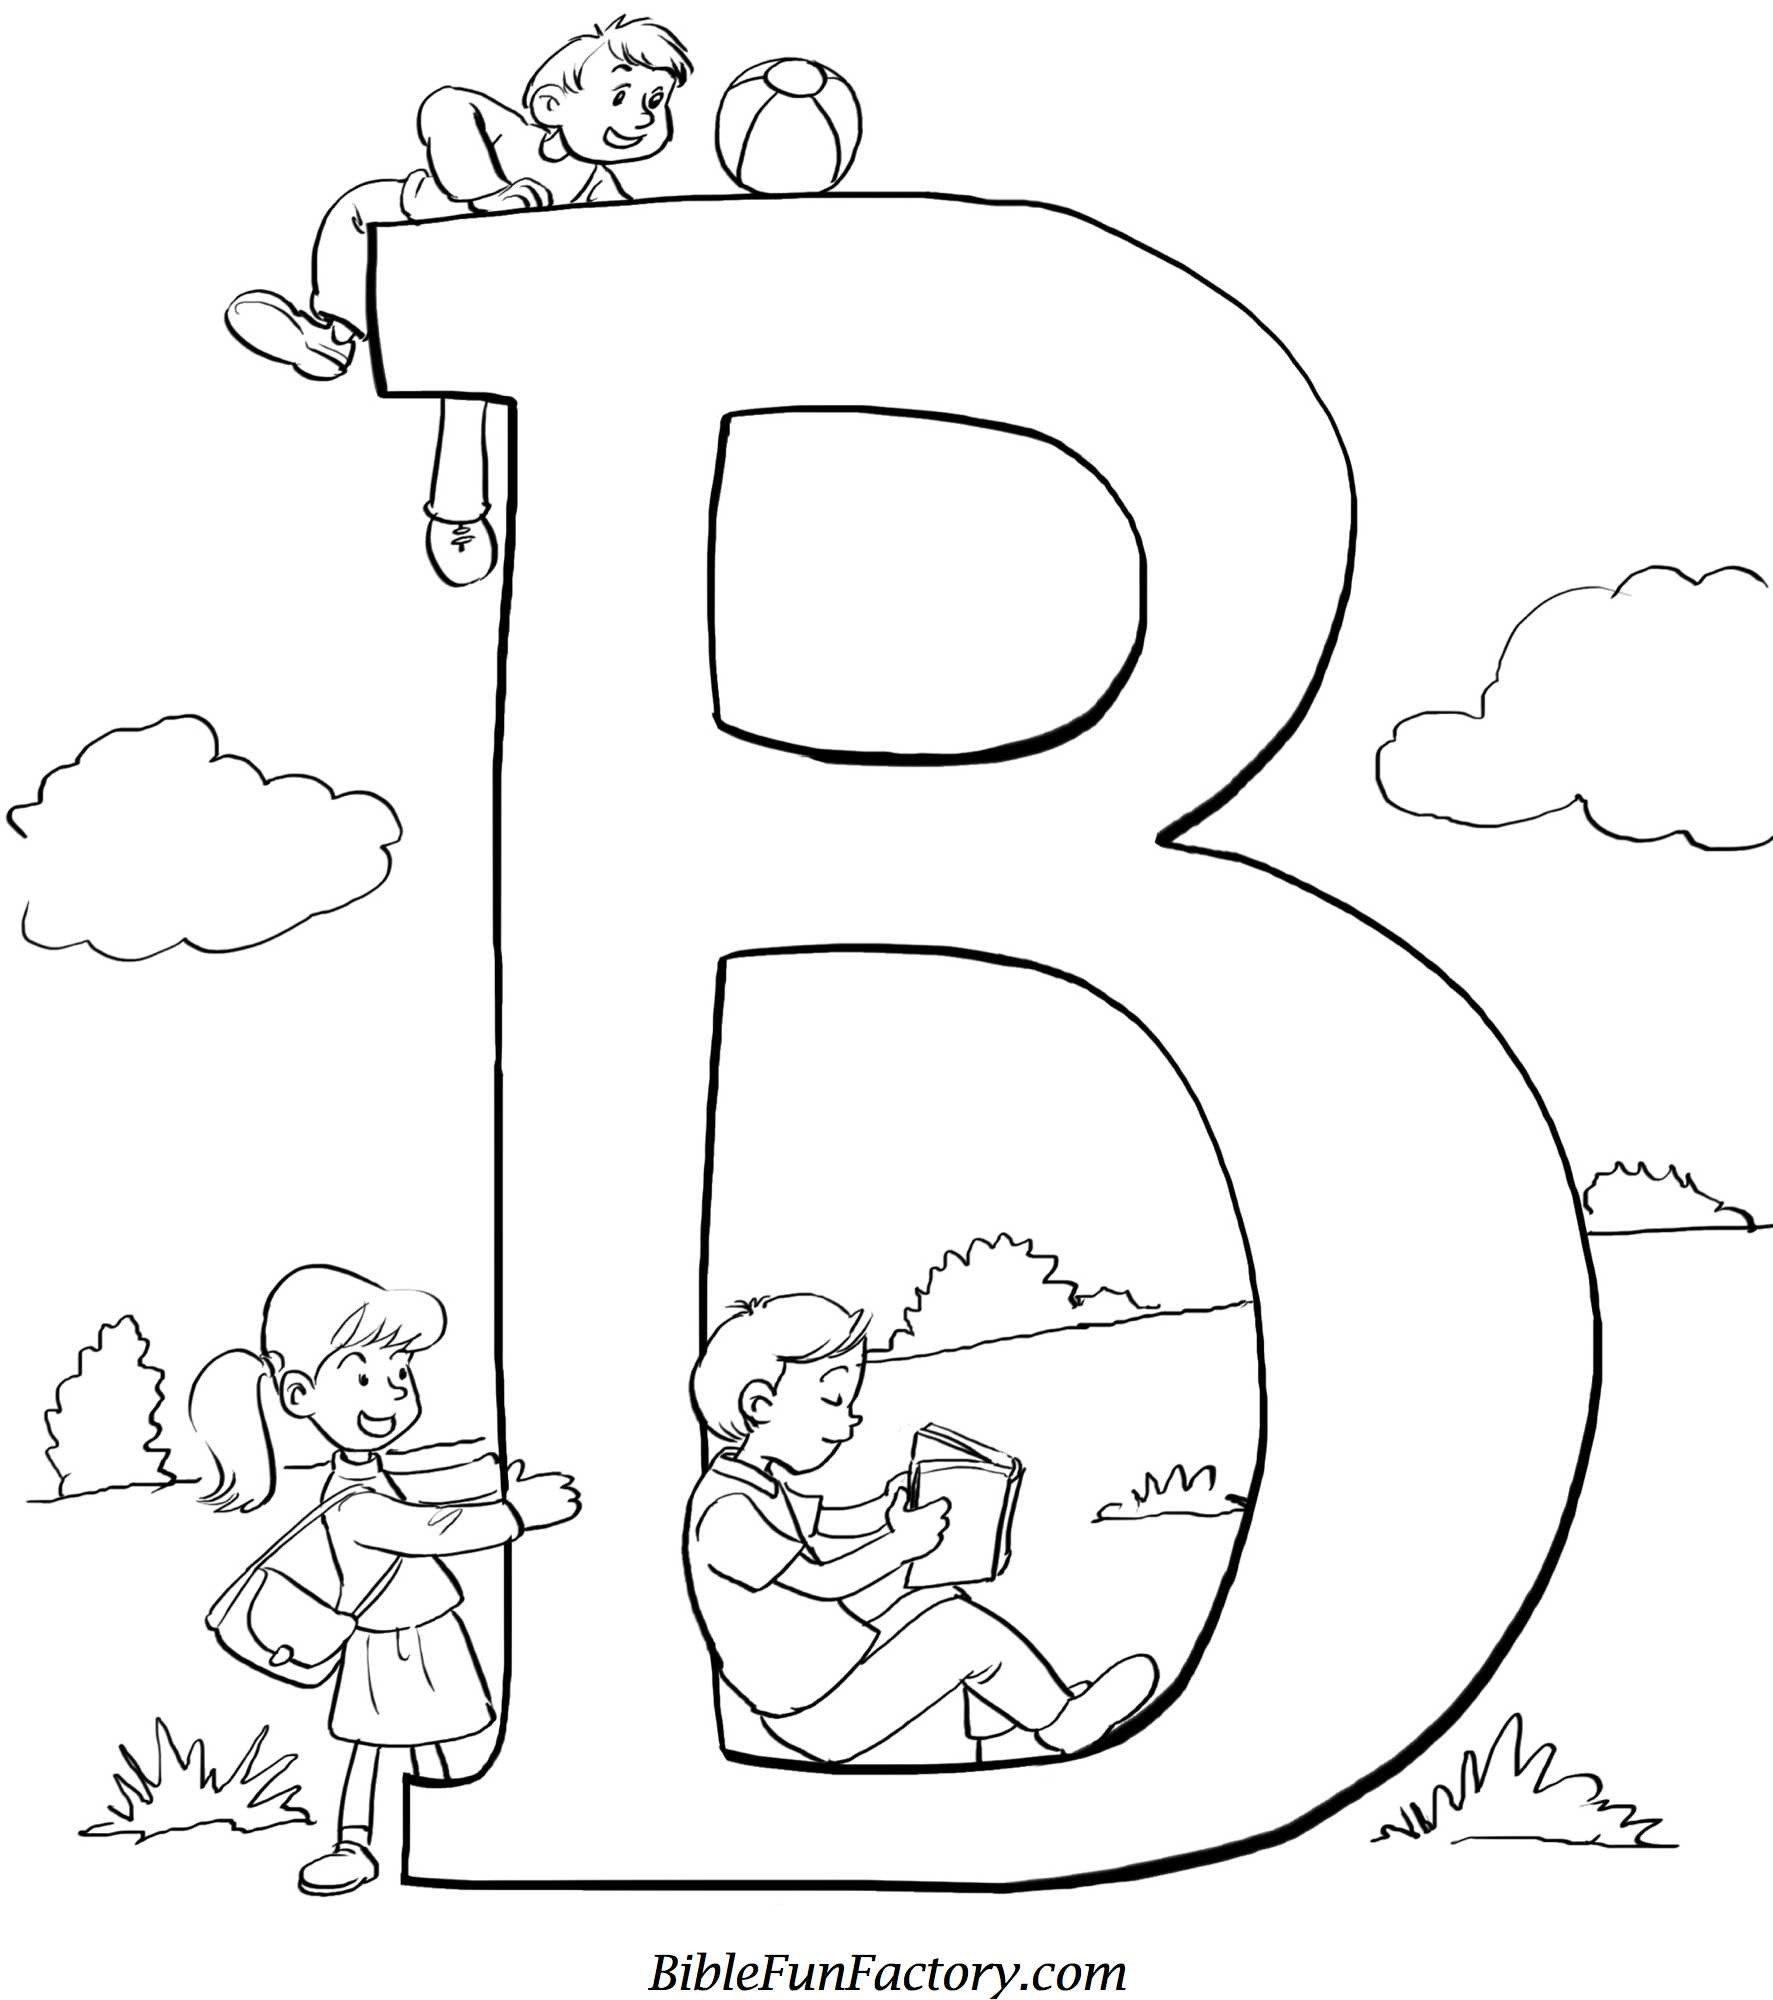 Bible Coloring Pages For Kids
 Bible Coloring Sheet "B" is for Bible